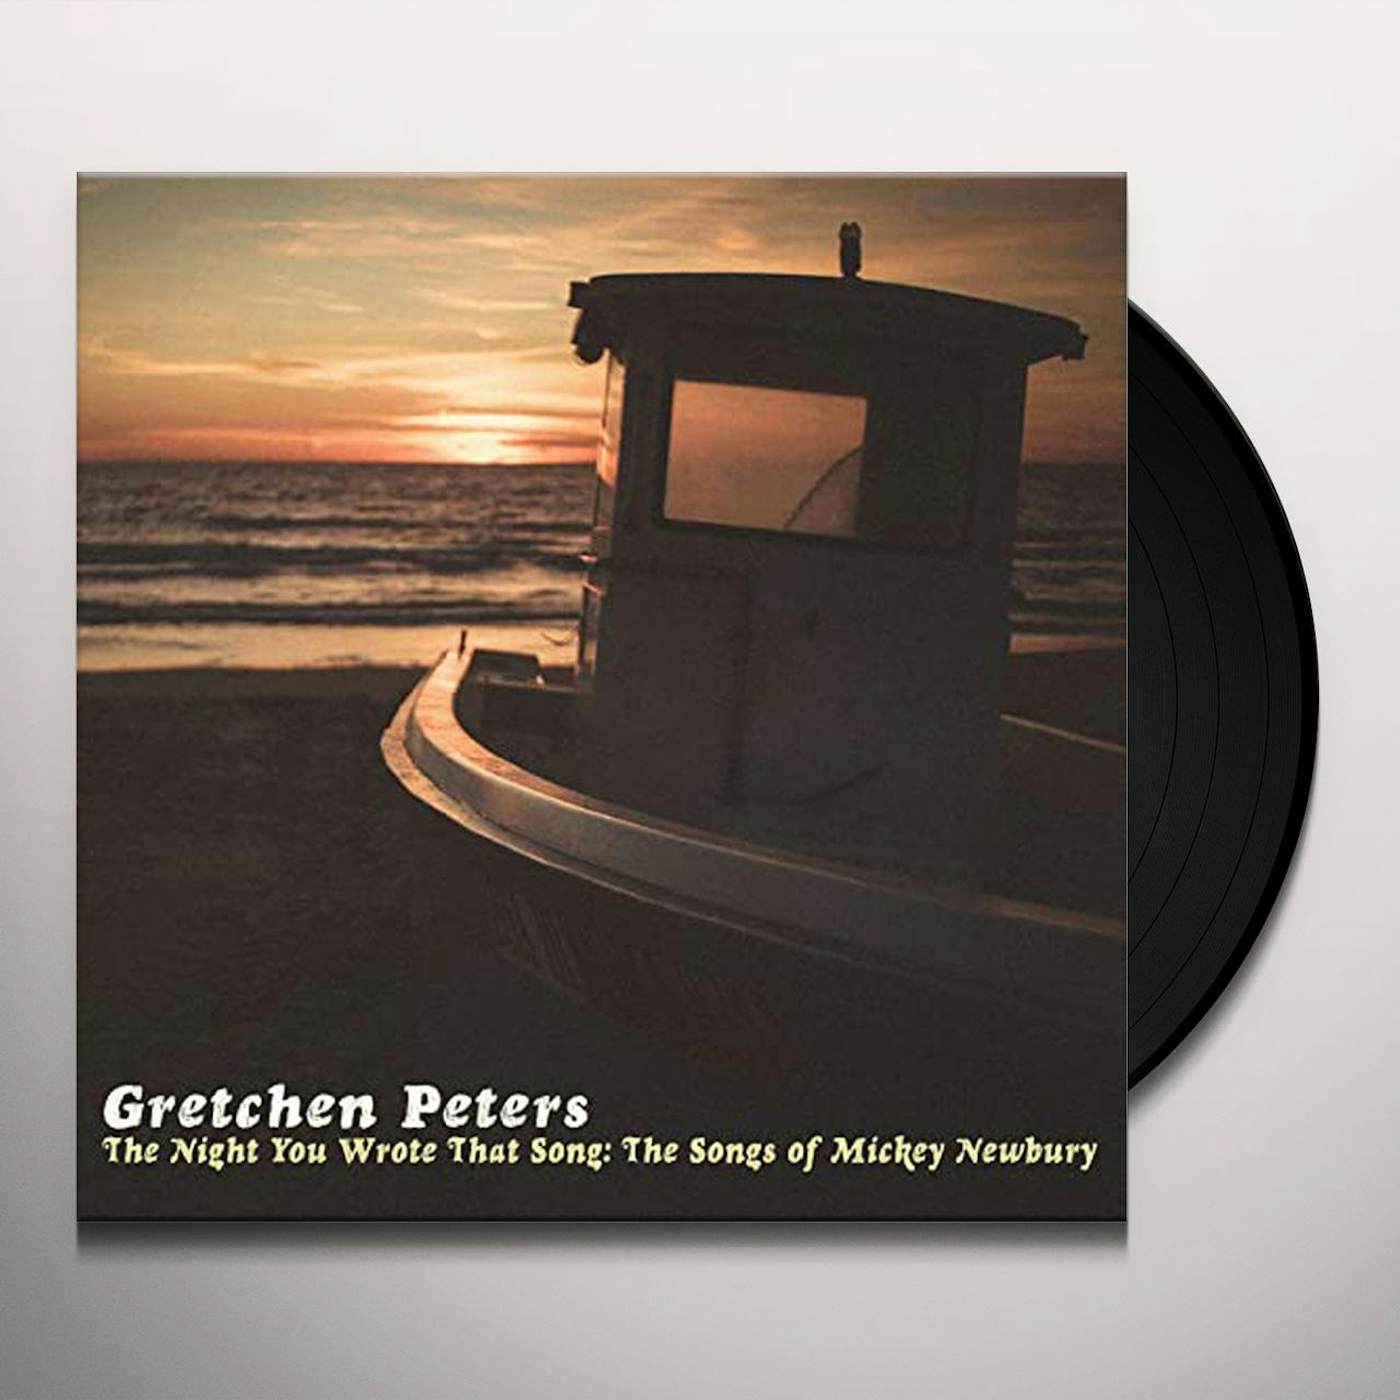 Gretchen Peters NIGHT YOU WROTE THAT SONG: SONGS OF MICKEY NEWBURY Vinyl Record